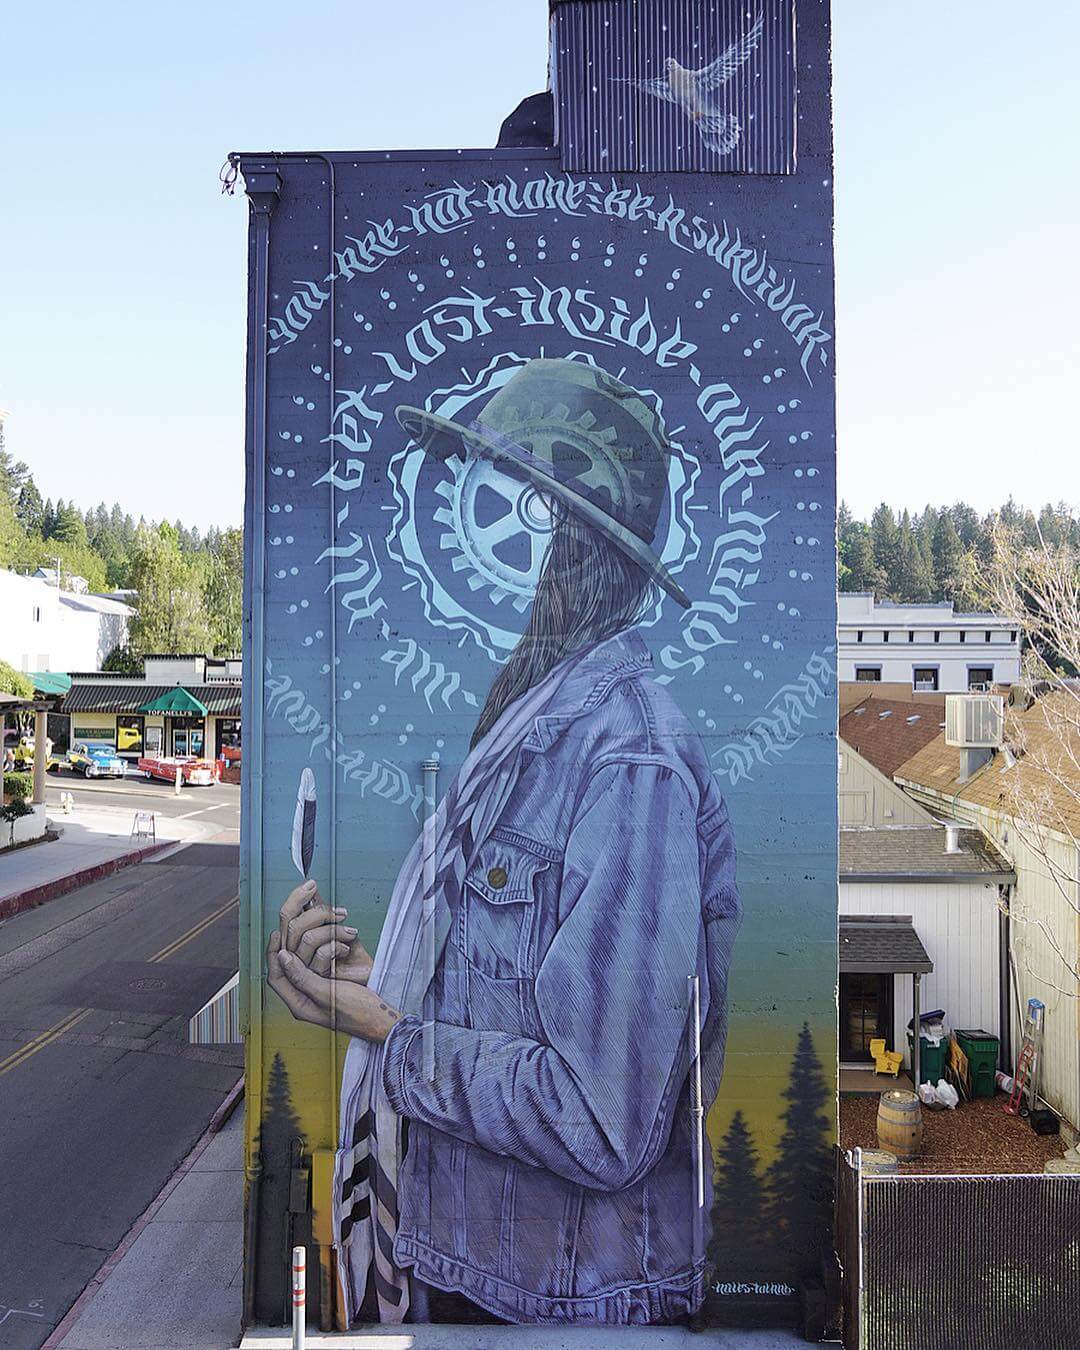 Miles Toland | Mural | Grass Valley, CA | 2019